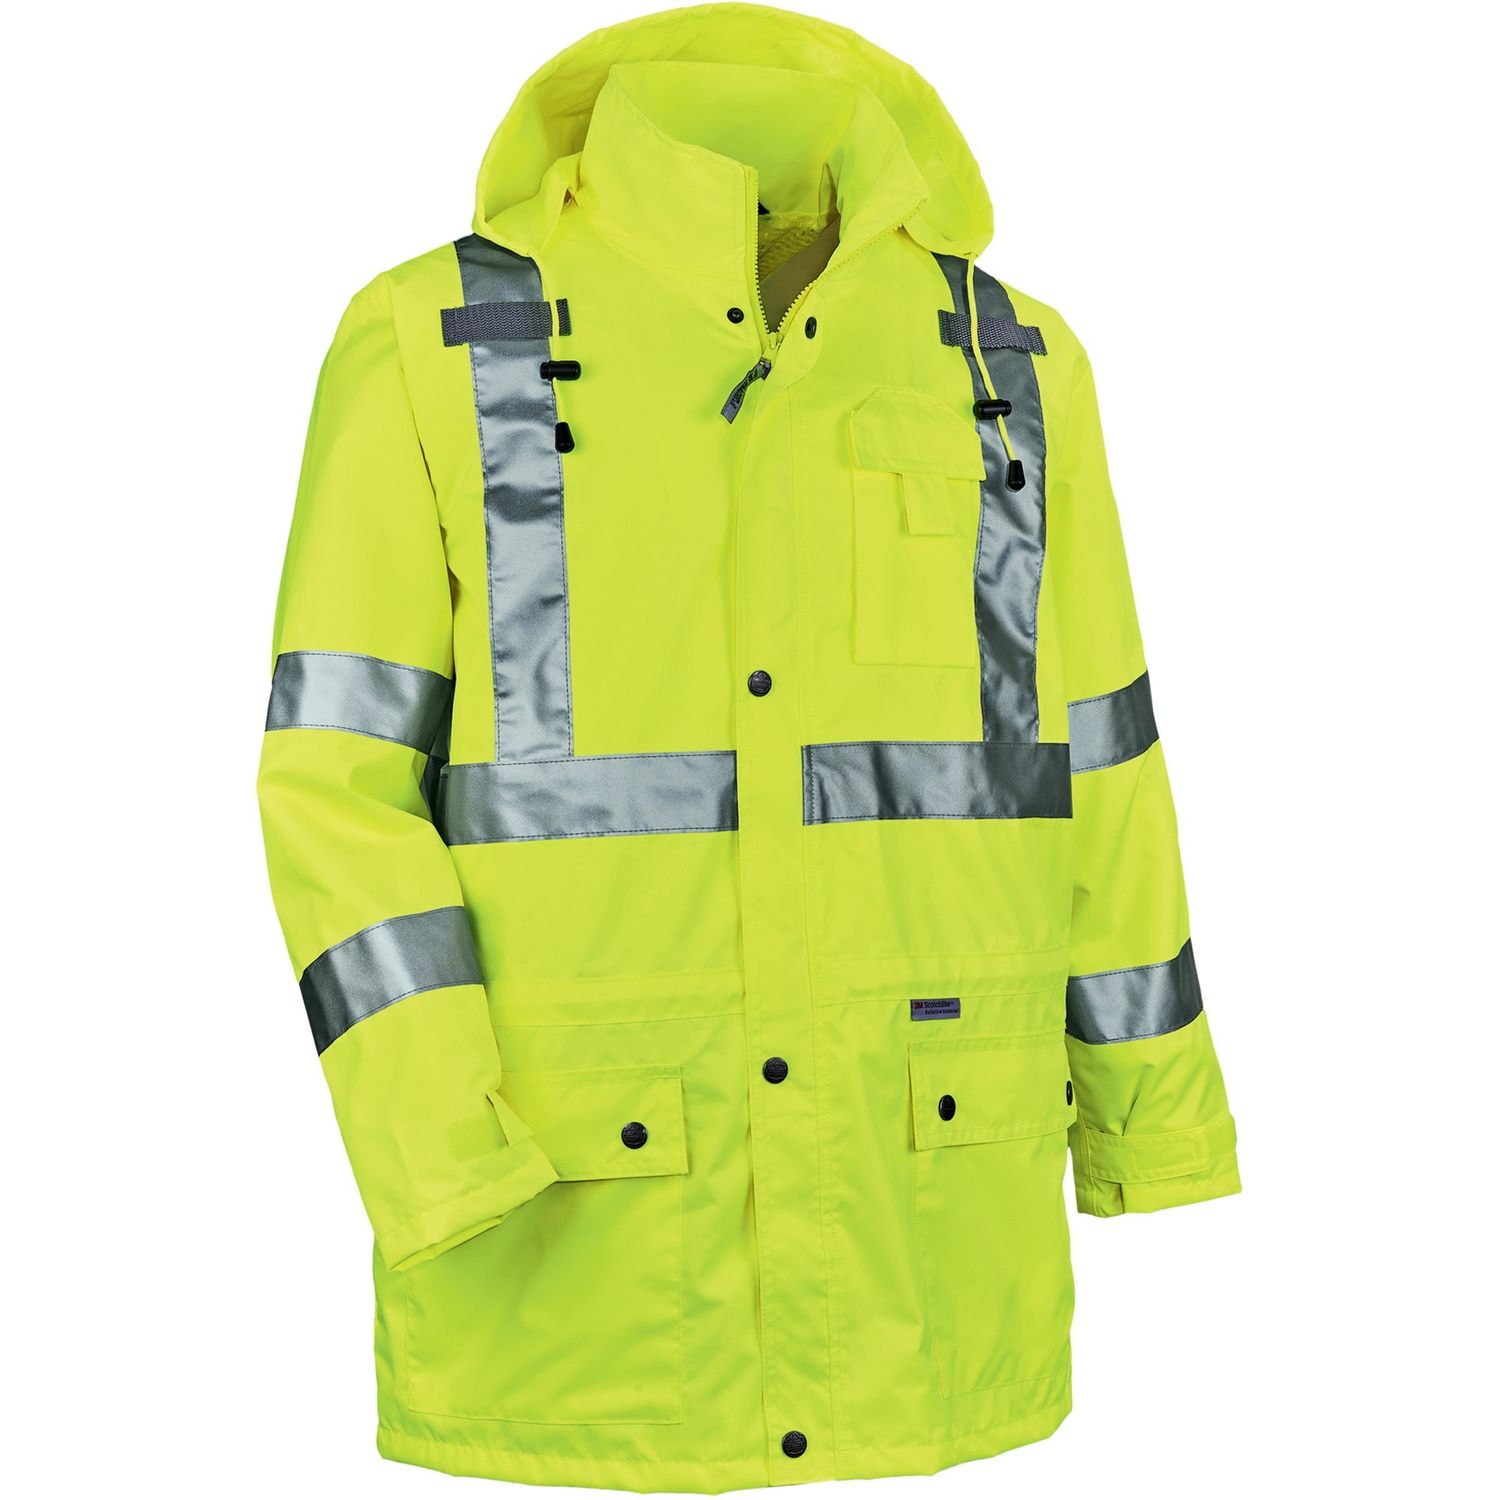 8365 Type R Class 3 Rain Jacket Recommended for: Construction, Utility, Emergency, Cell Phone, Airline Crew, Railway Worker, Survey Crew